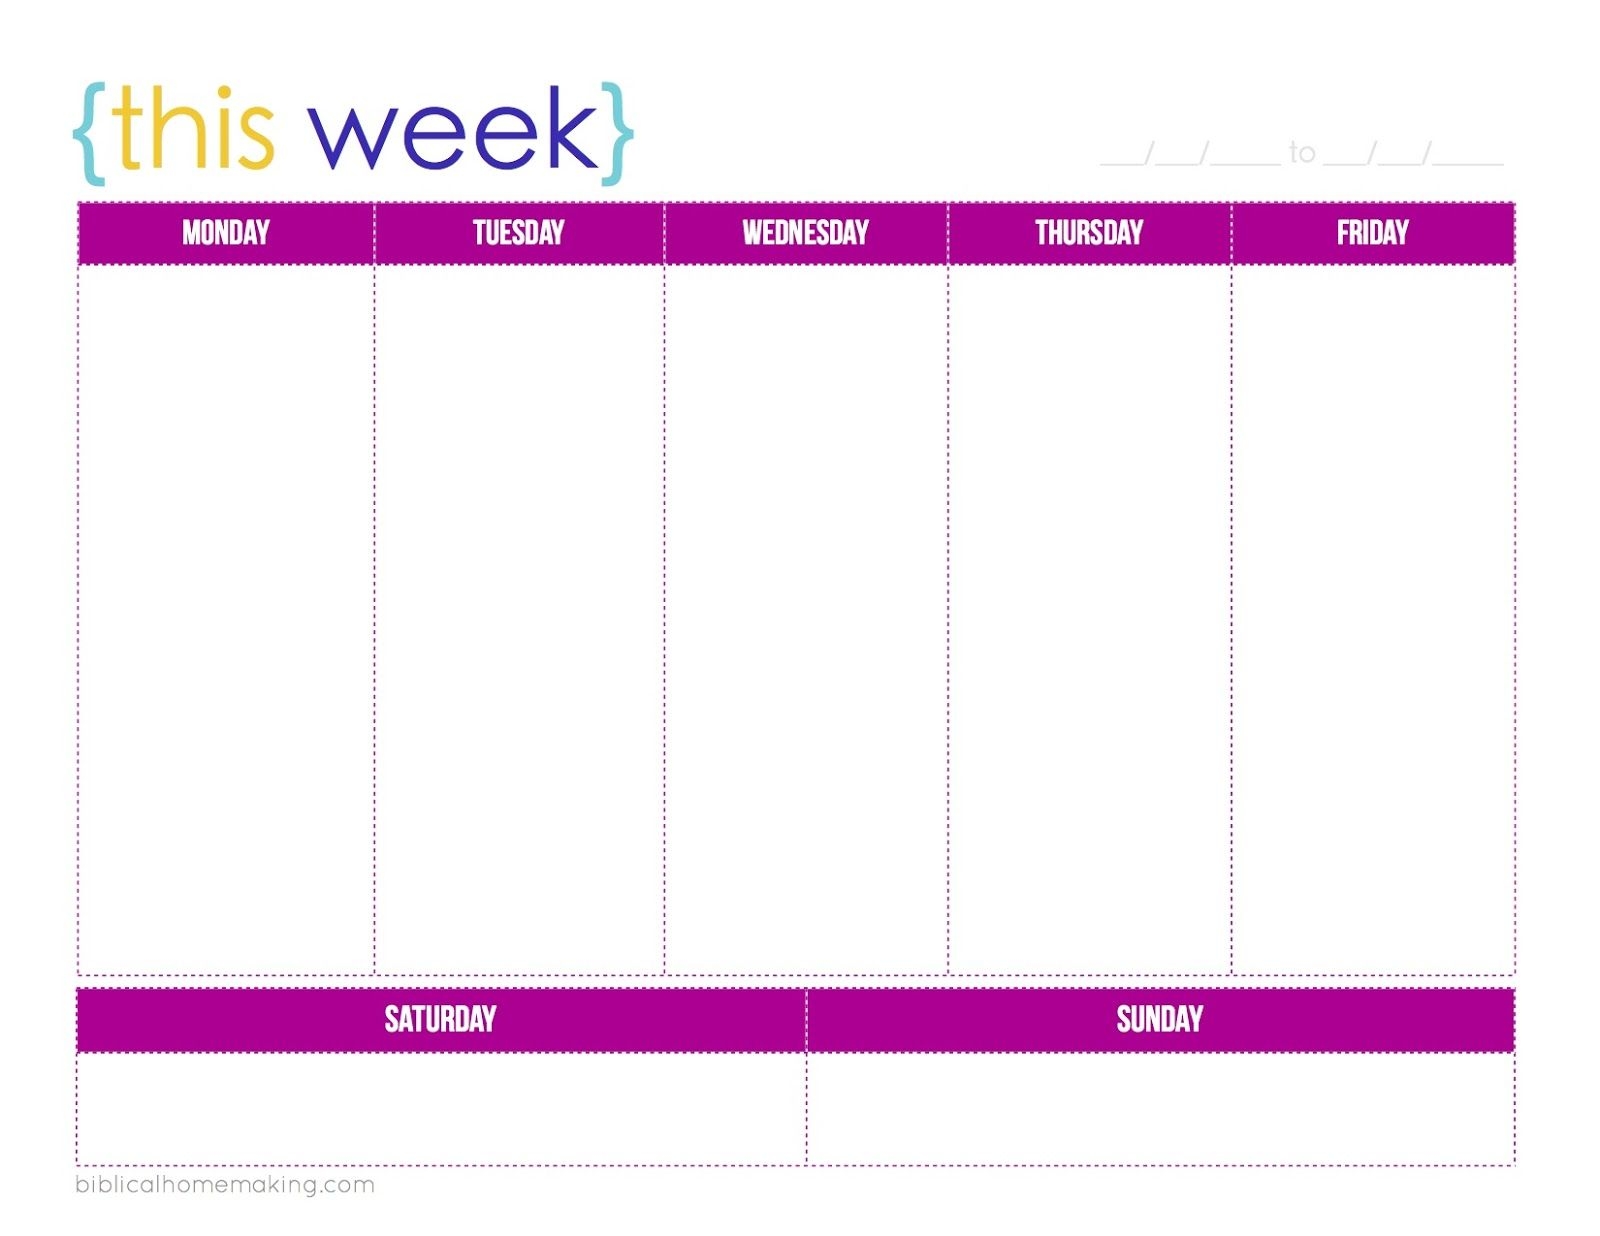 Universal Monday To Friday Blank Kids Schedule Get Your Calendar Printable